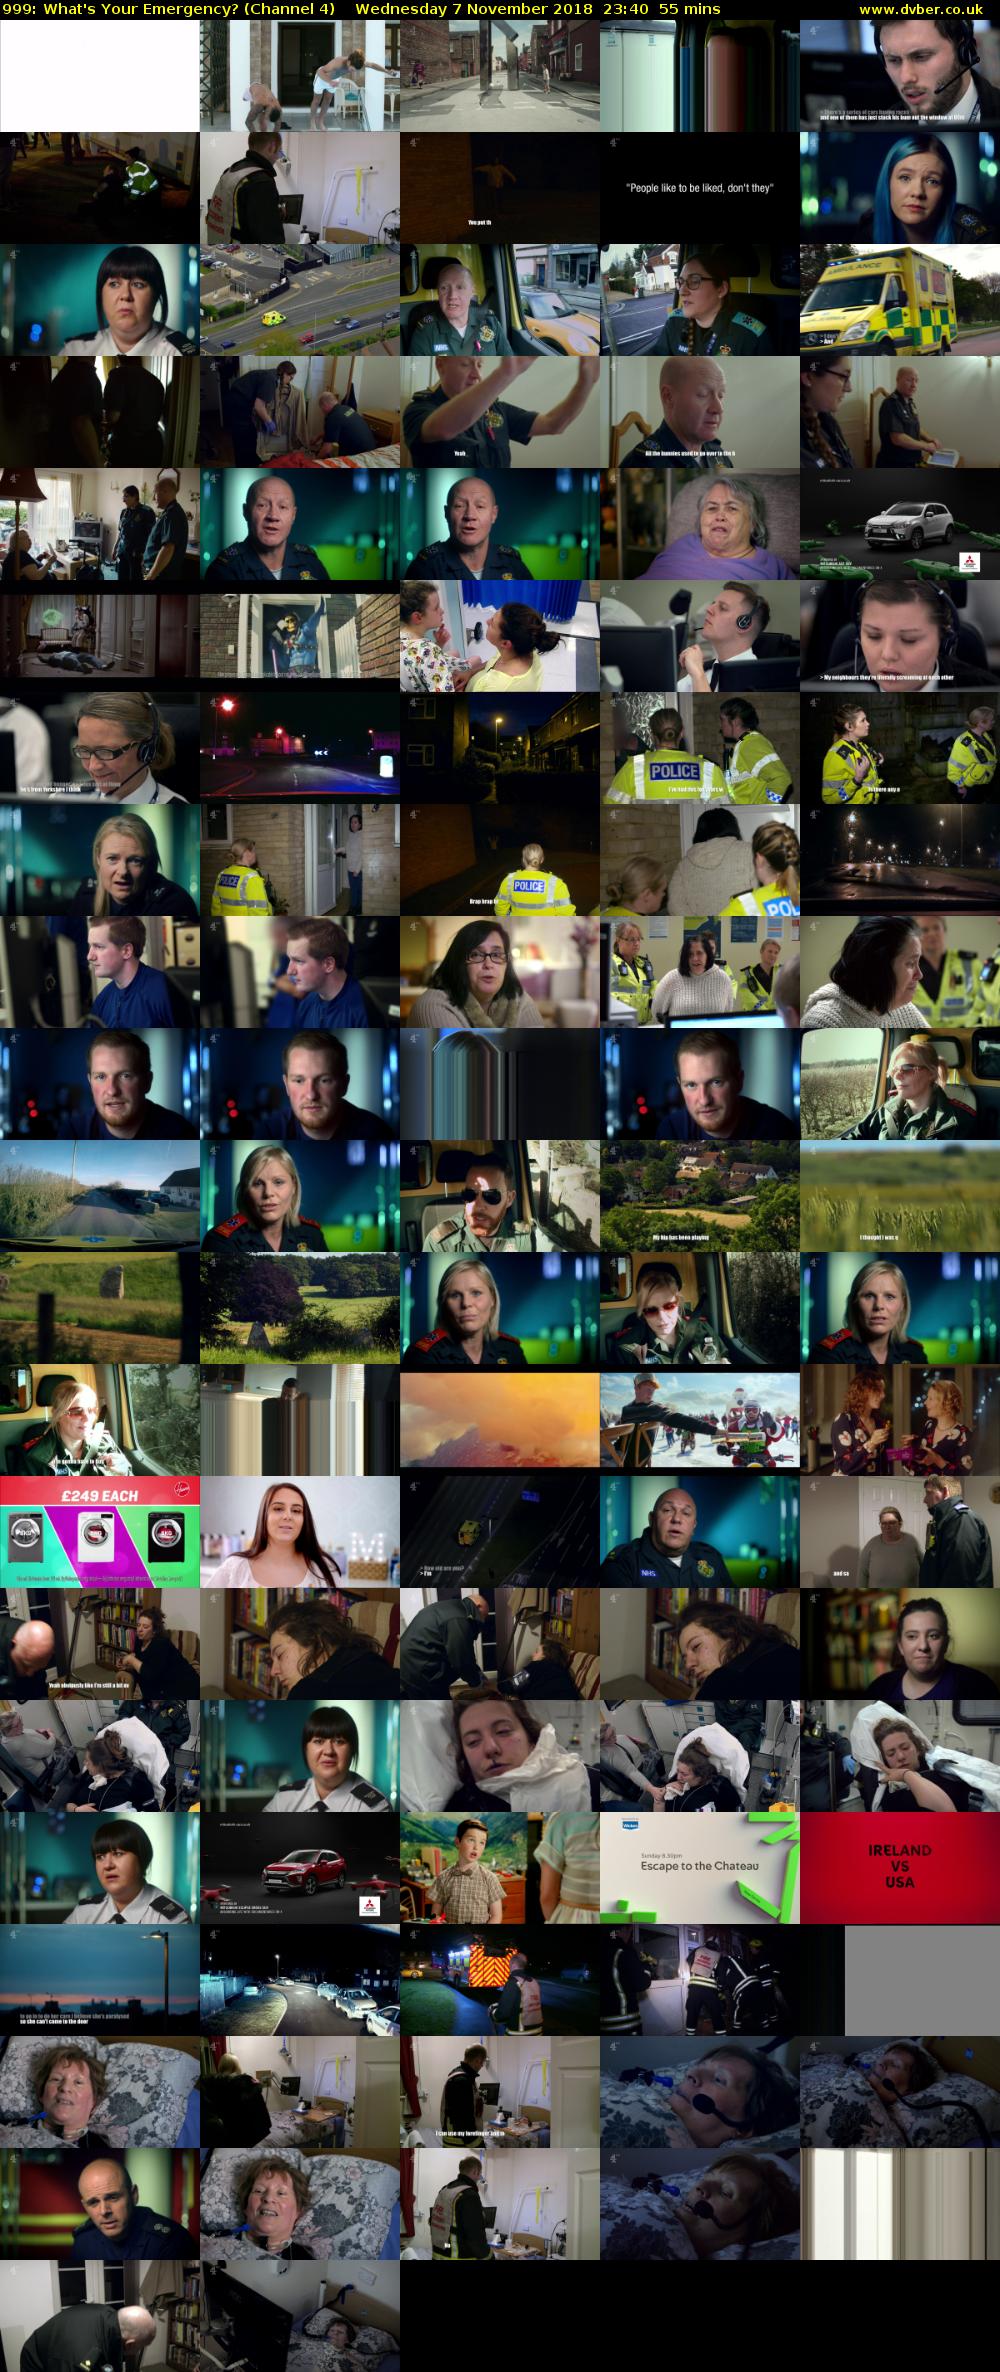 999: What's Your Emergency? (Channel 4) Wednesday 7 November 2018 23:40 - 00:35